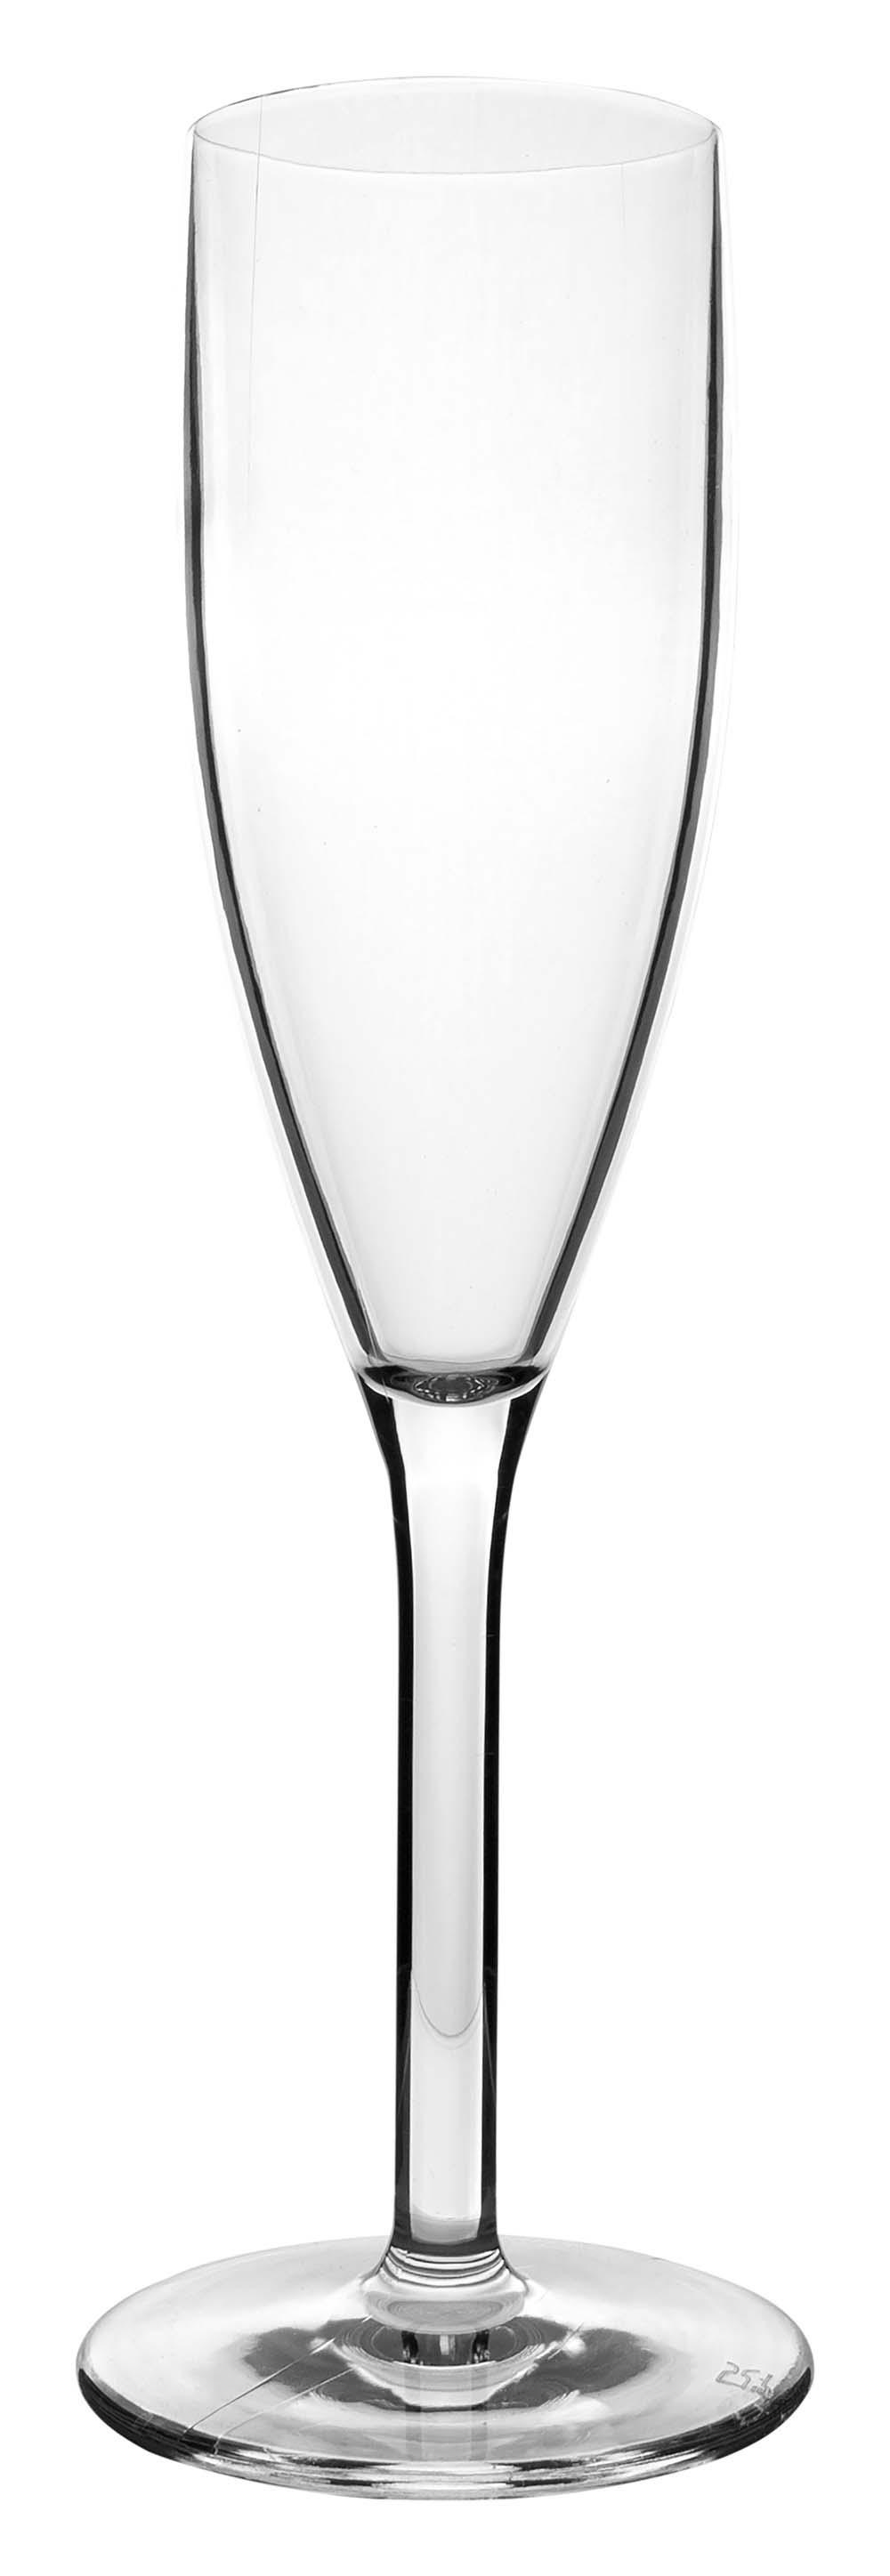 6101437 An extra sturdy and luxurious champagne glass. Made of 100% polycarbonate. This makes the glass almost unbreakable, light weight and scratch proof. The glass is also dishwasher safe.